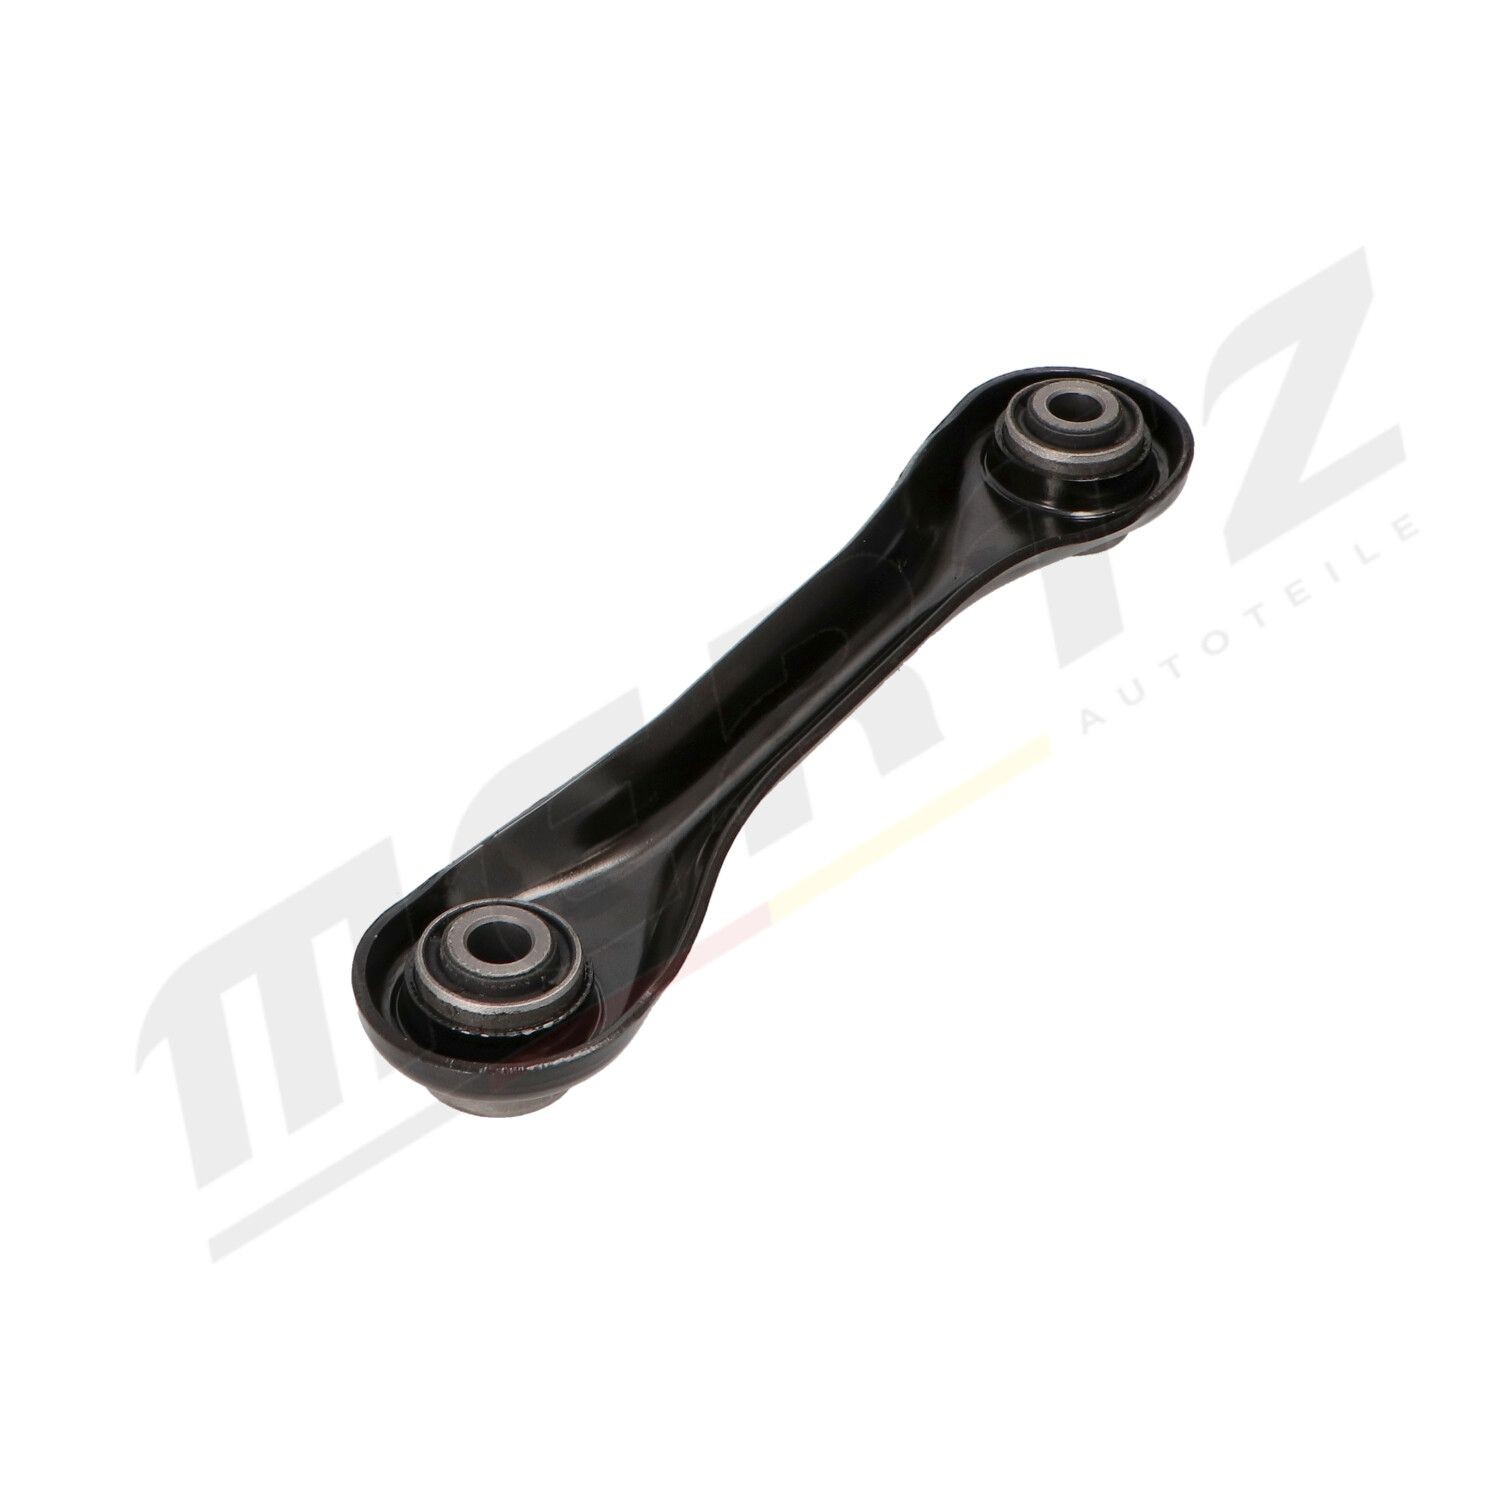 MERTZ M-S2368 Suspension control arm with bearing(s), Rear Axle Left, Rear Axle Right, Lower, Control Arm, Sheet Steel